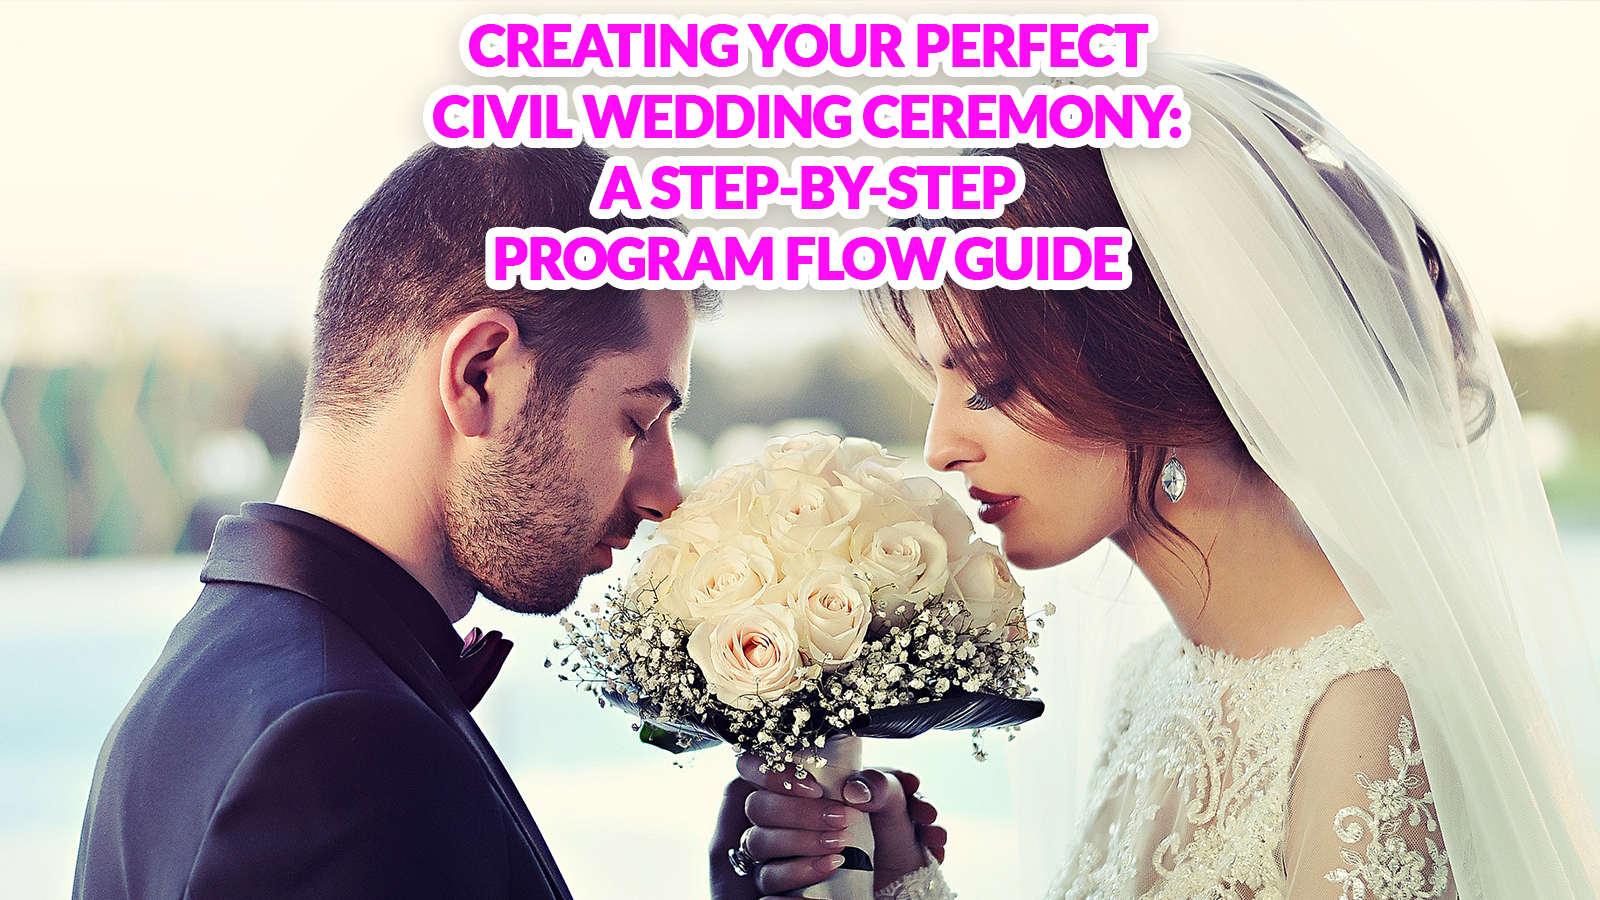 Creating Your Perfect Civil Wedding Ceremony: A Step-by-Step Program Flow Guide